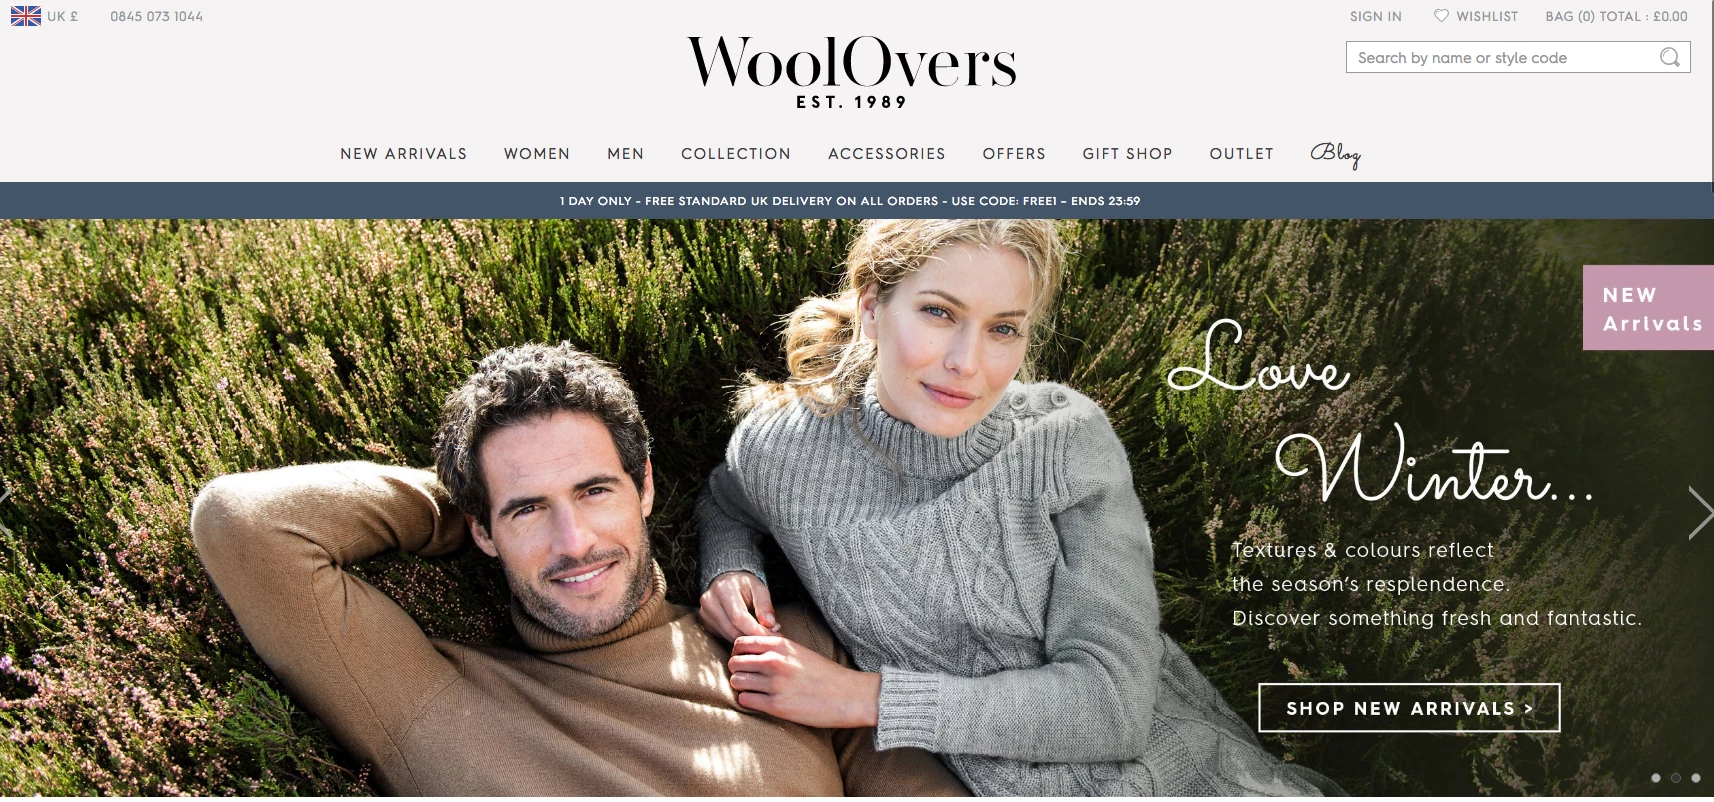 WoolOvers has partnered with Global-e to expand its reach in international markets.